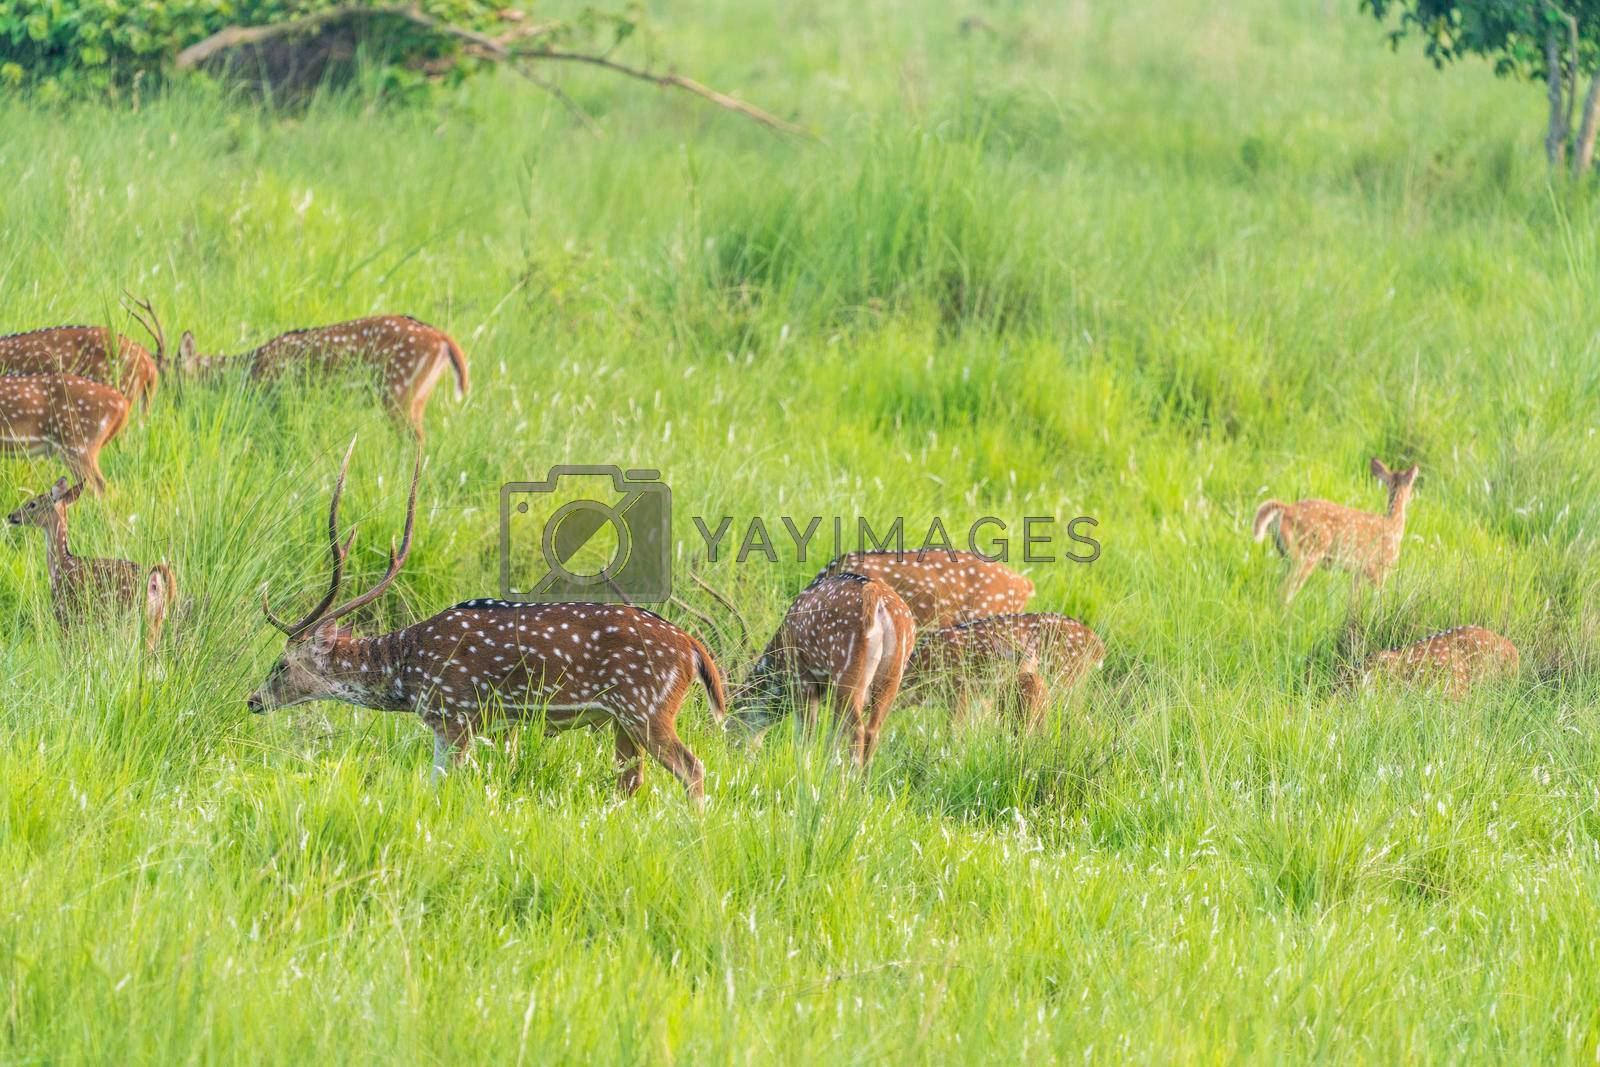 Royalty free image of Sika or spotted deers herd in the elephant grass by Arsgera